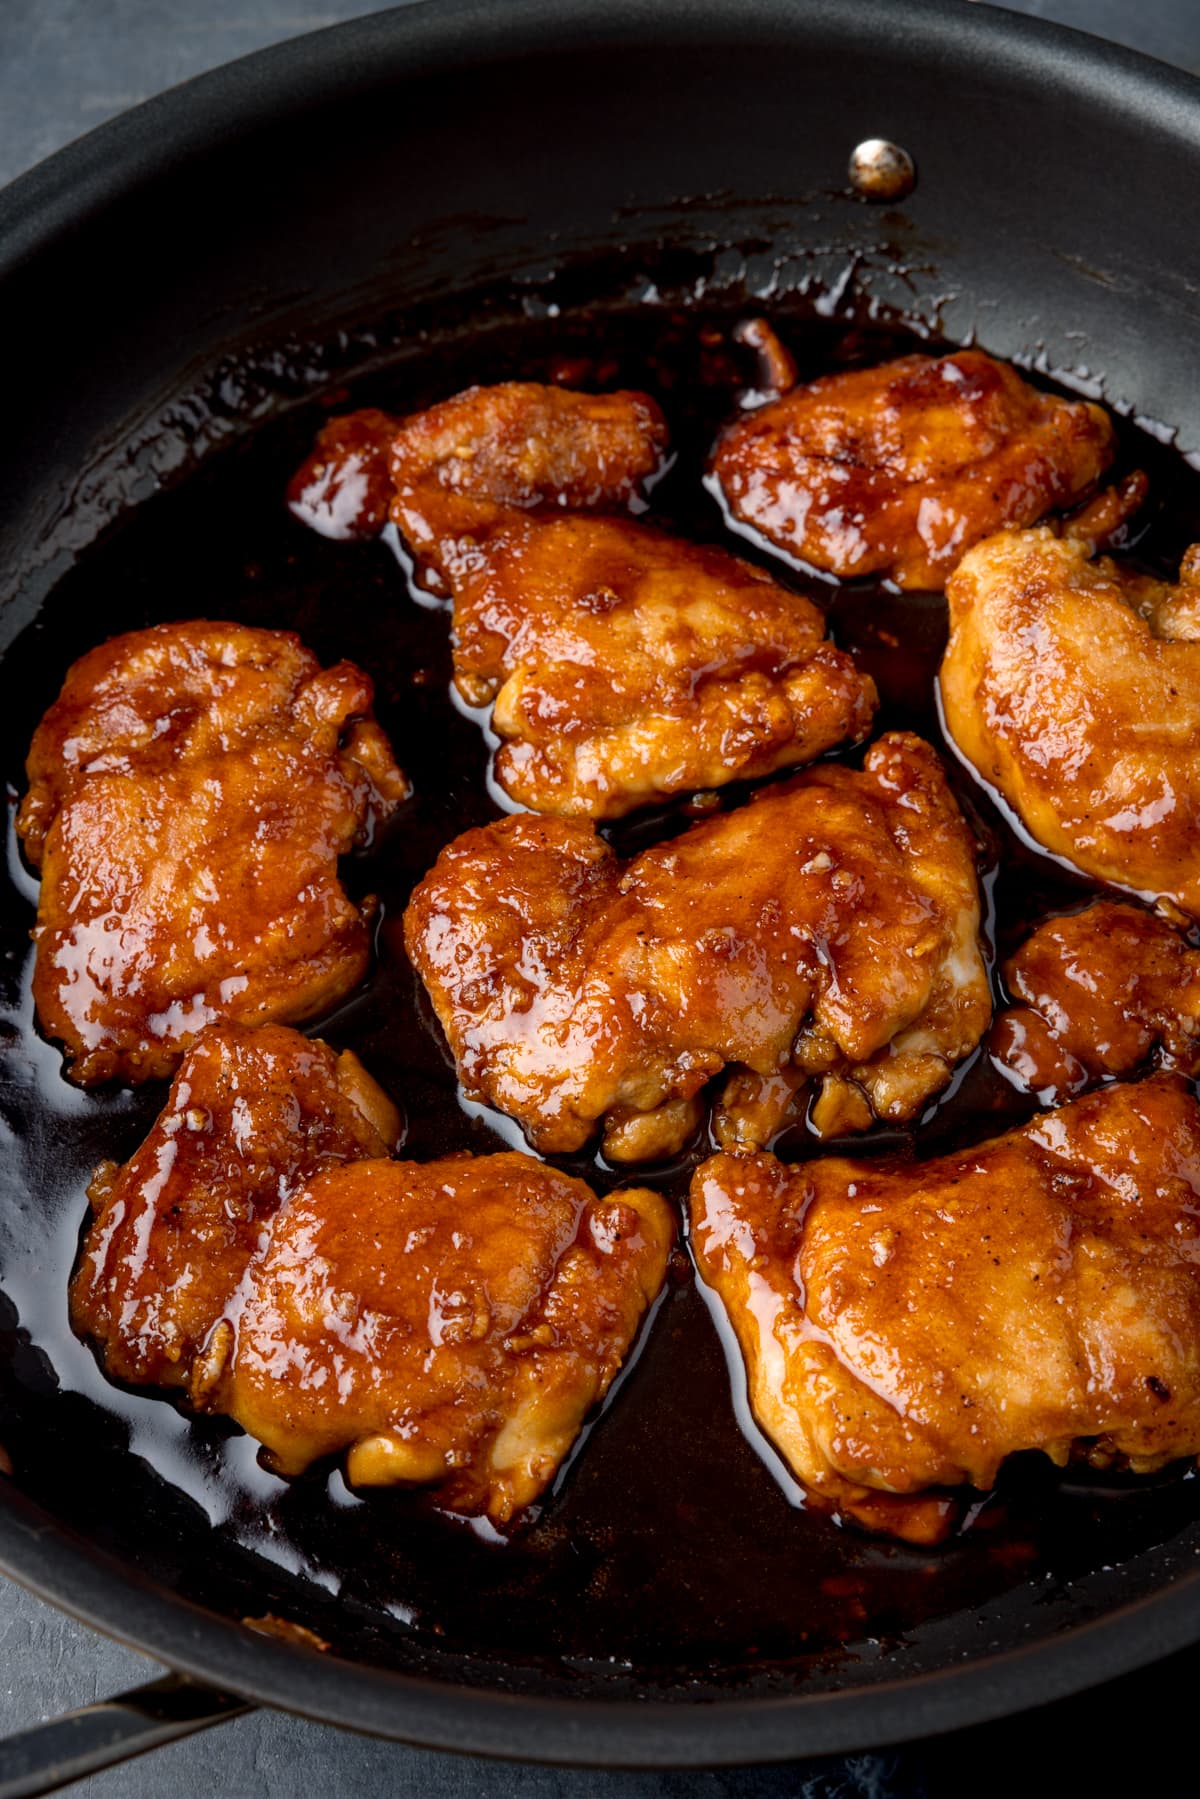 A tall shot of the whole bourbon chicken fillets in a dark grey pan. The pan is resting on a grey background with a dark blue napkin.